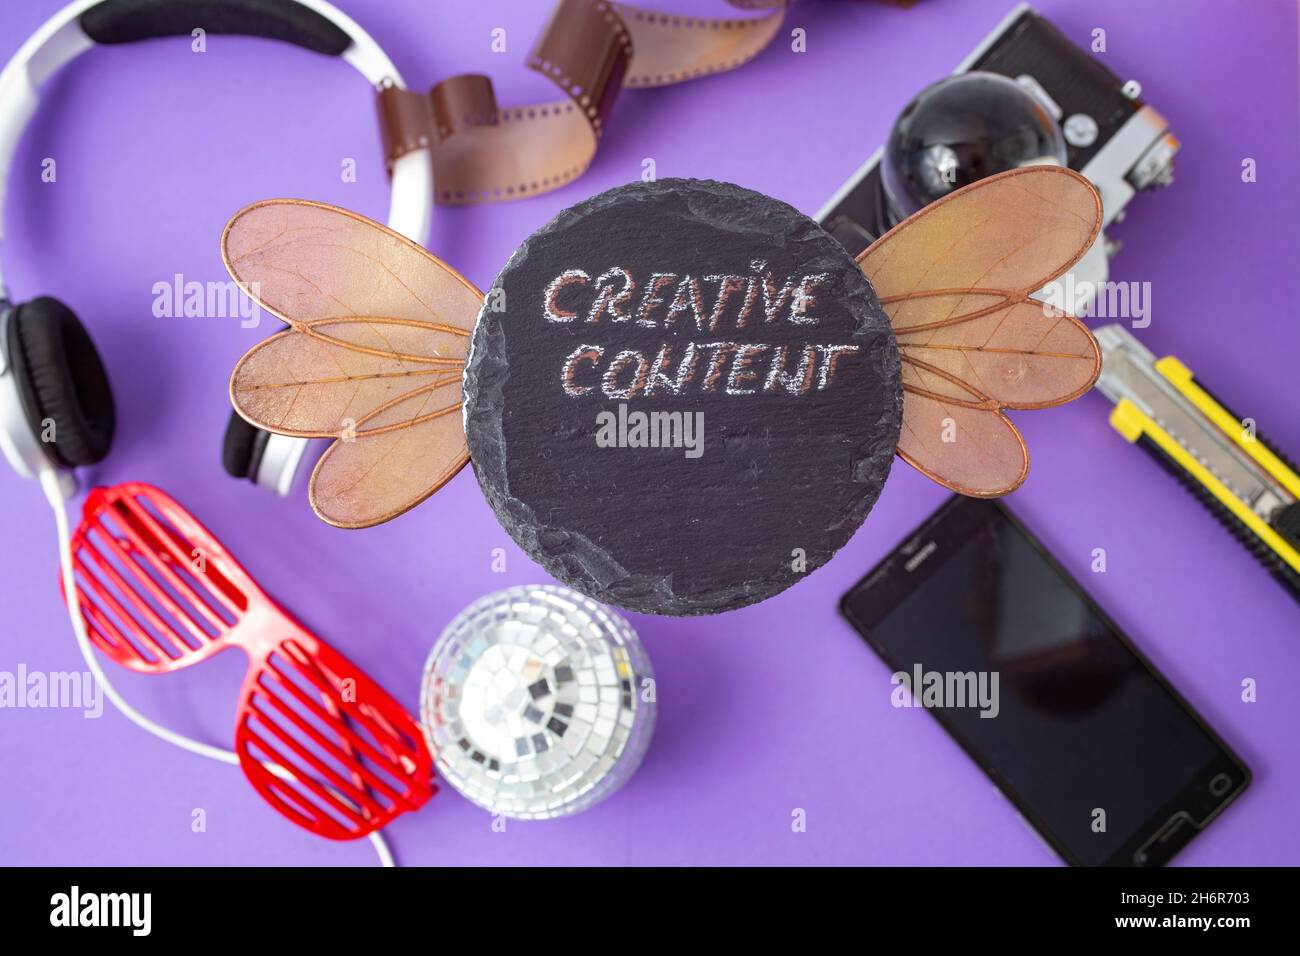 creative content written with chalk on a black stone tile, with different  objects blurred in the background Stock Photo